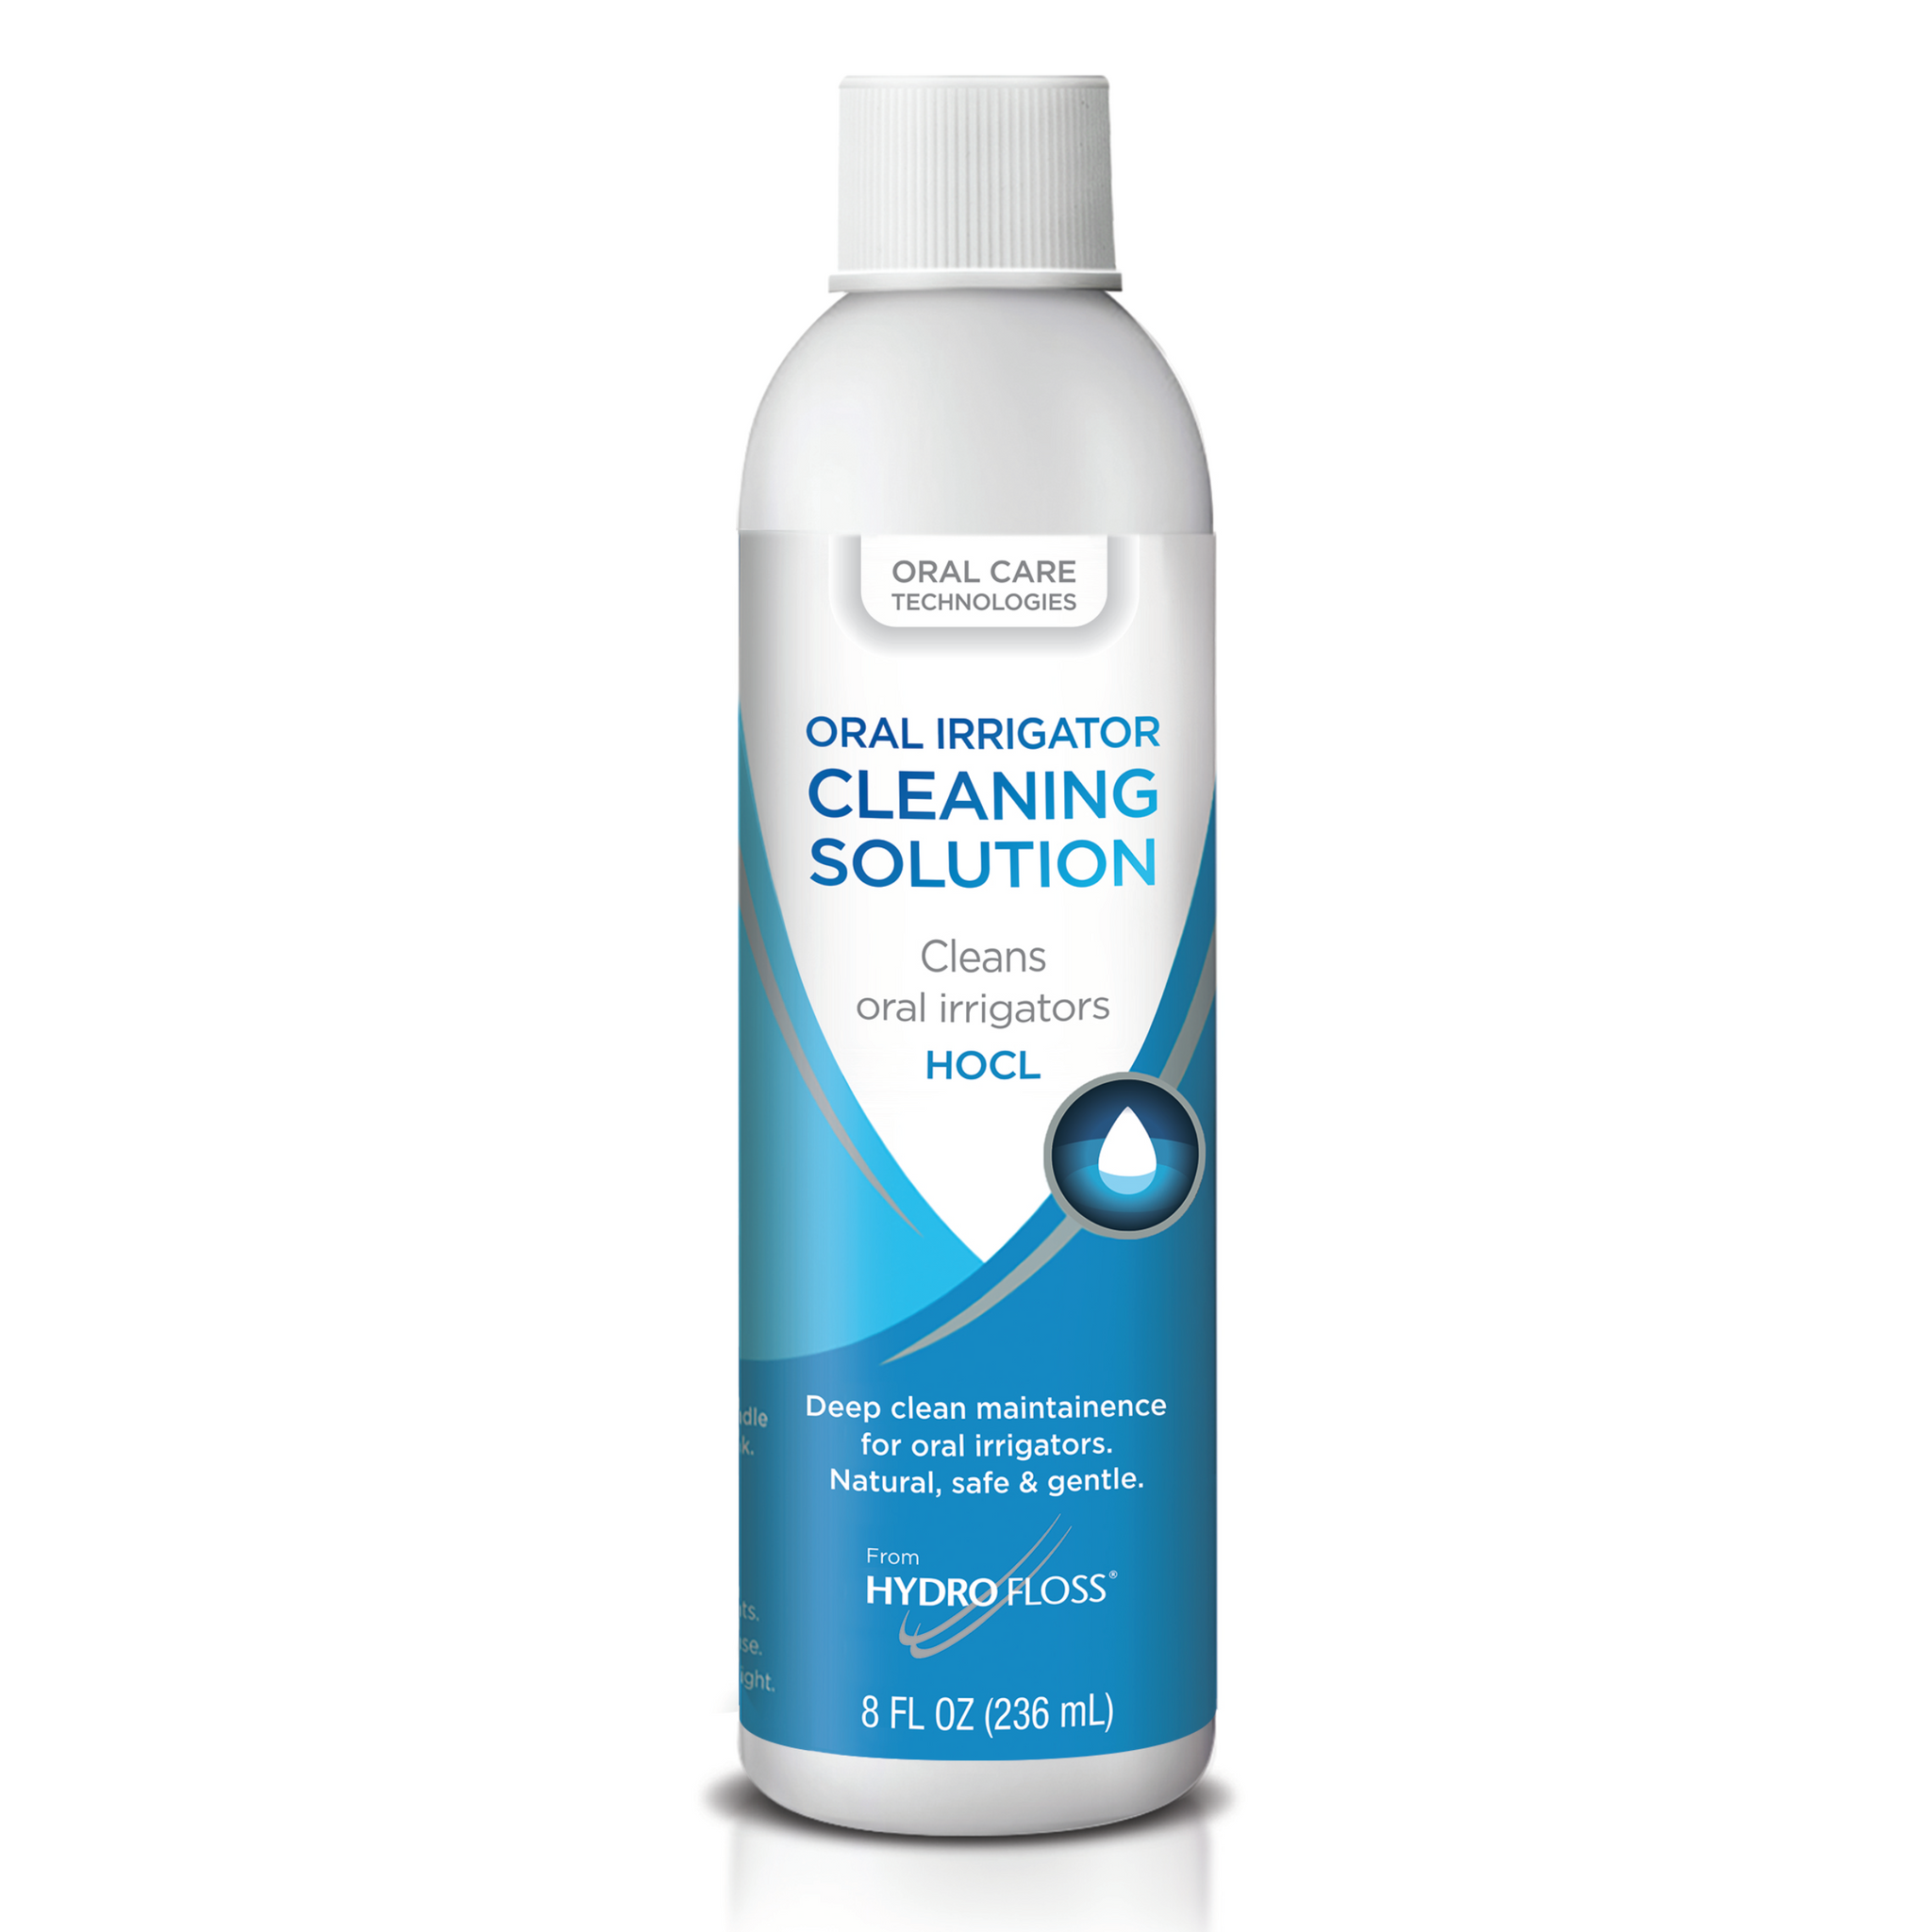 HOCL Irrigator Cleaning Solution